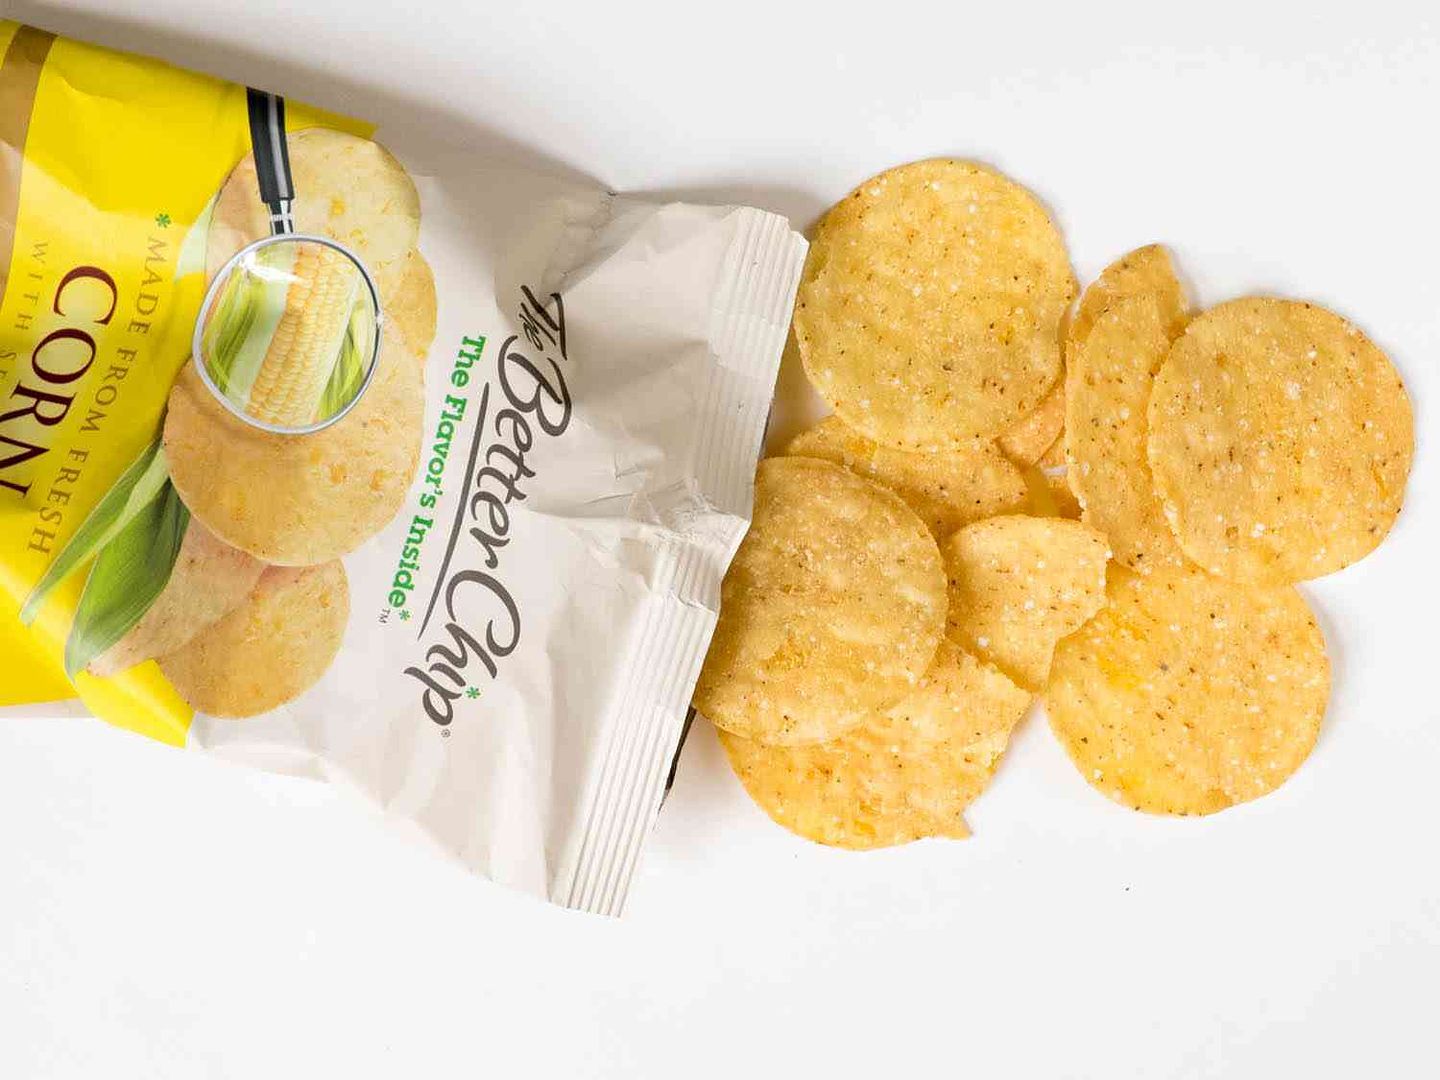 The Better Chip is a healthy back to school snack made with real, GMO-free vegetables and is gluten-free, though you'd never guess | Cool Mom Eats